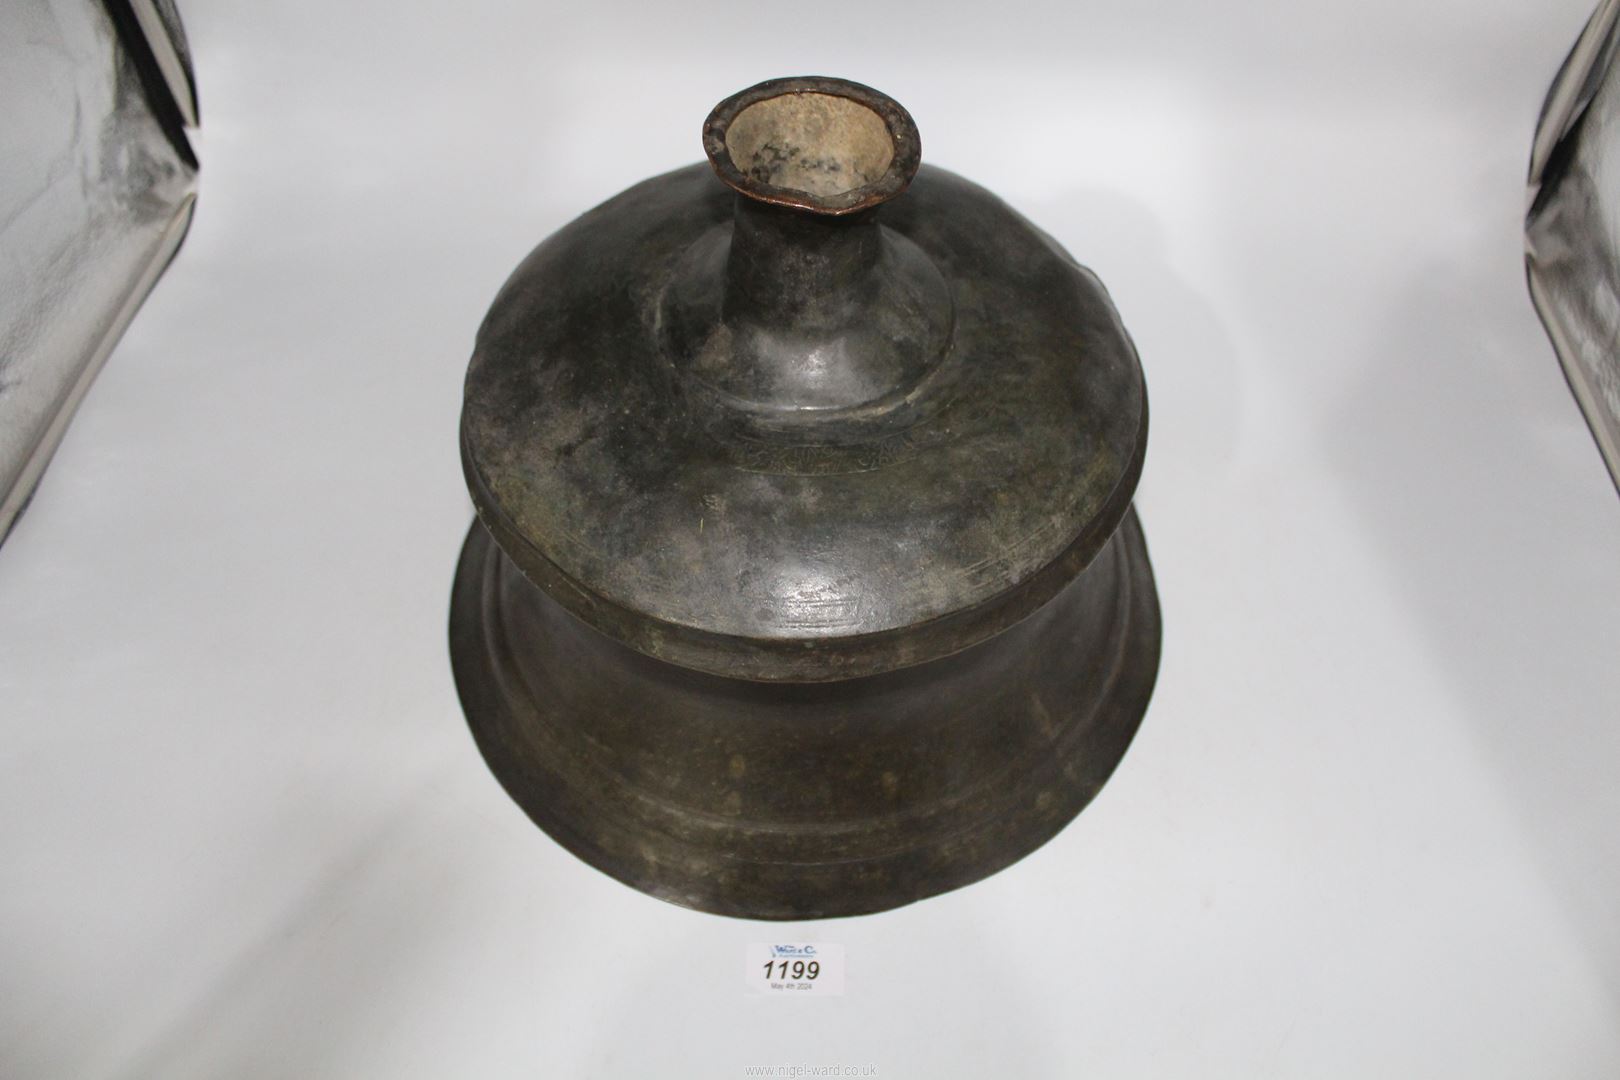 A rare Khorassan bronze candlestick of typical form, 12th - 13th c. - Image 2 of 5